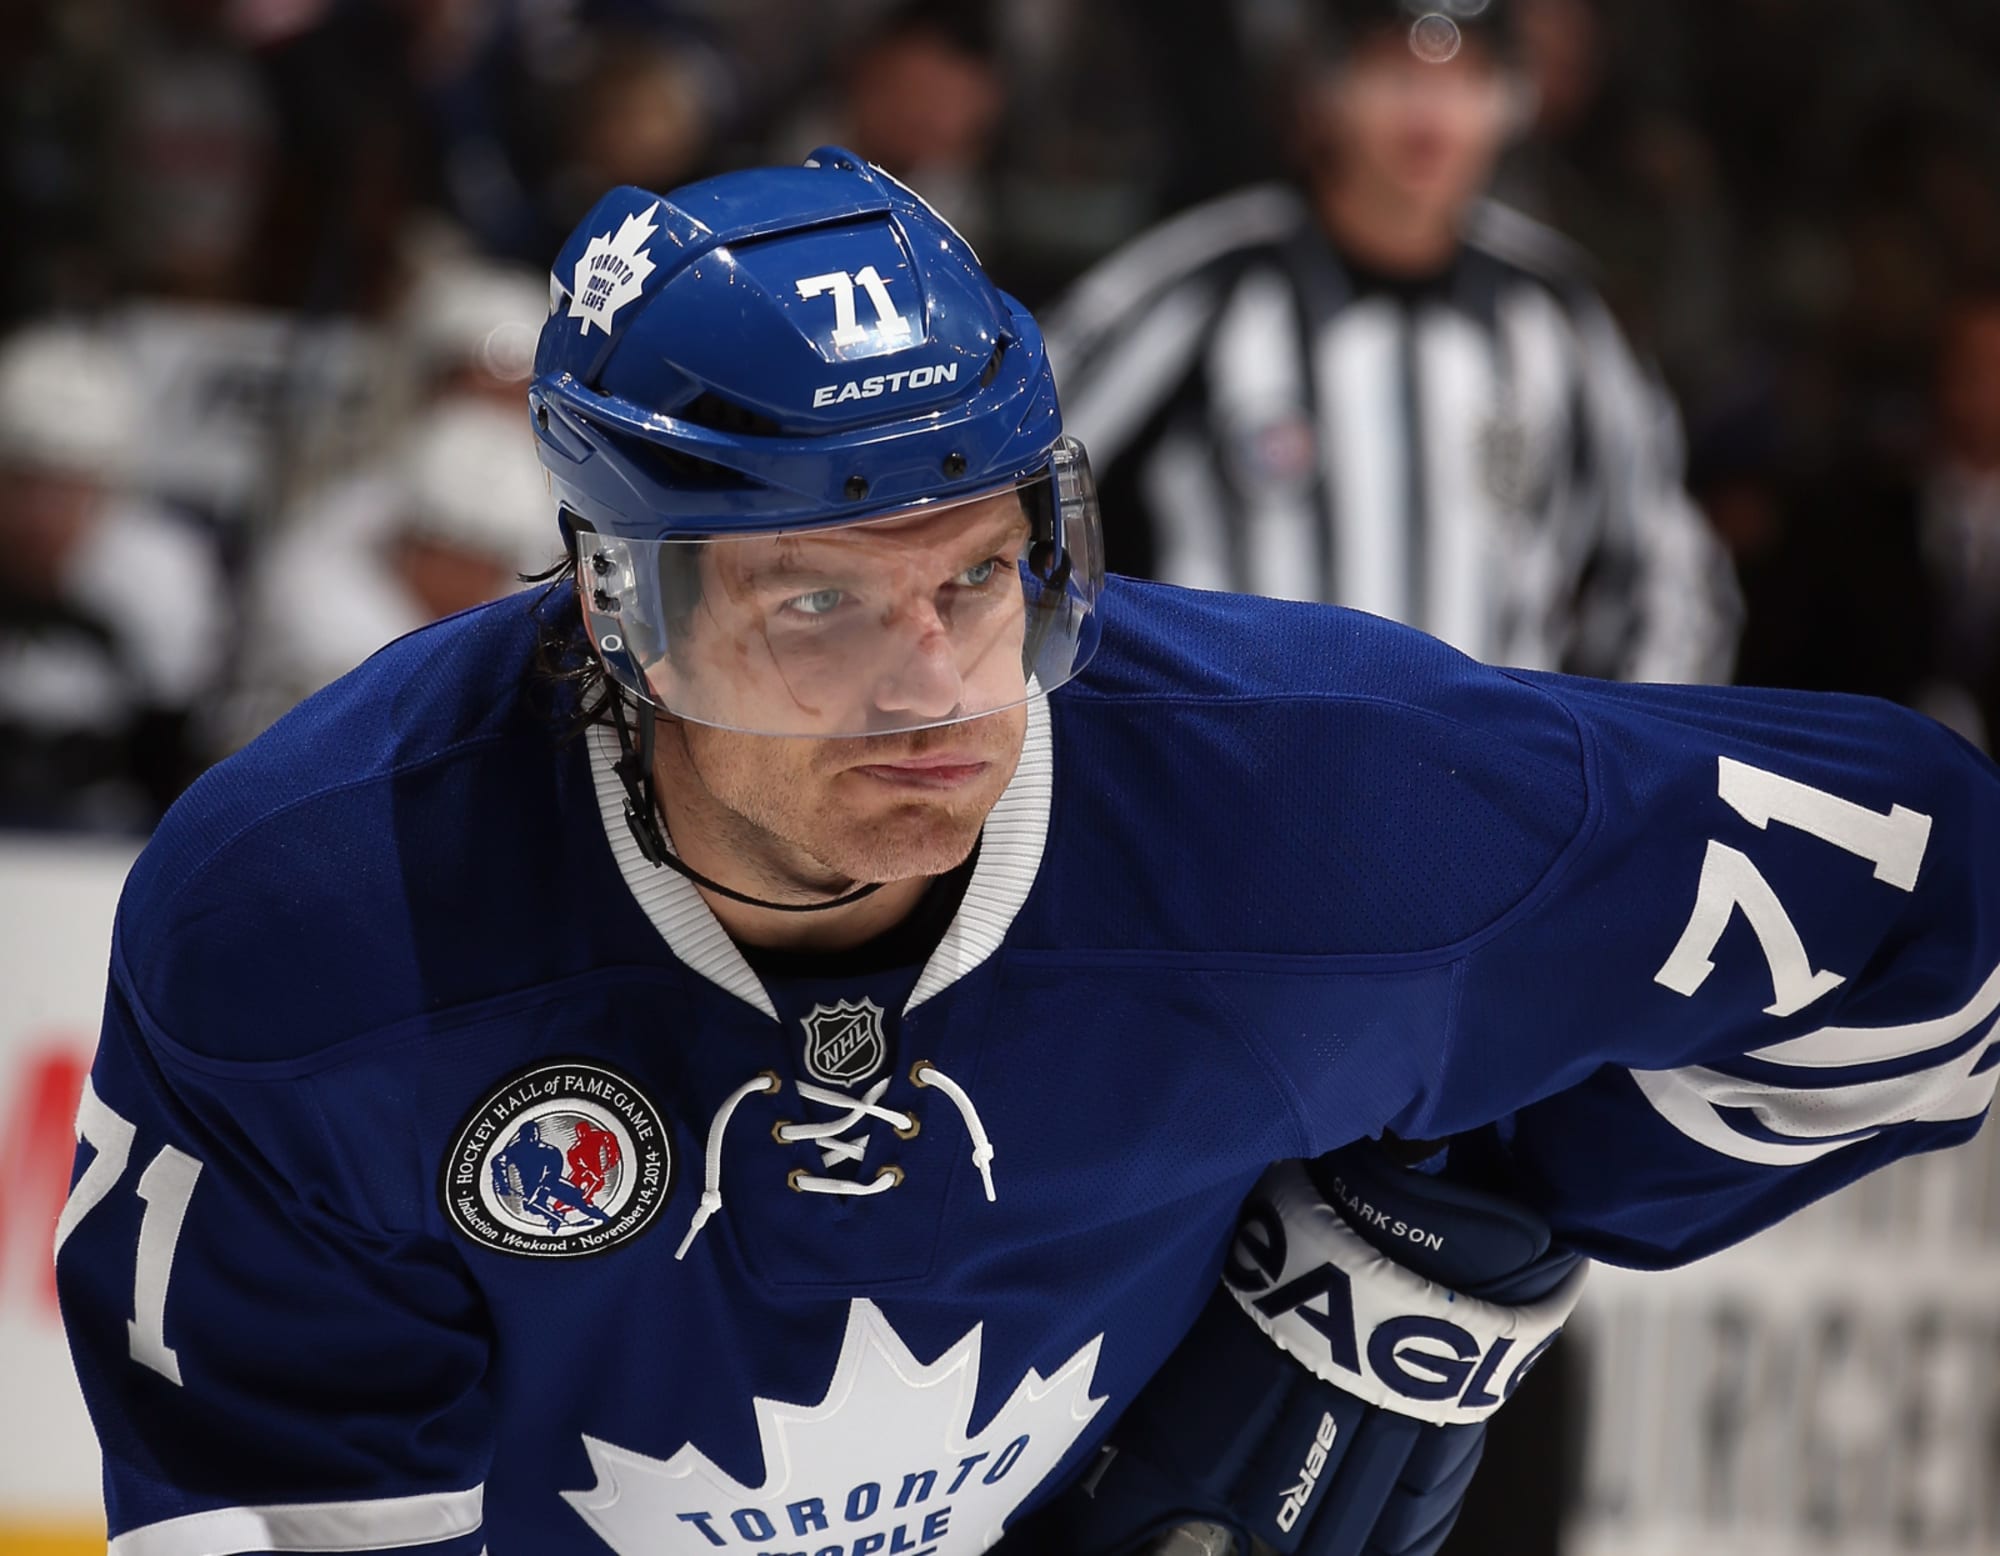 Leafs' David Clarkson faces hearing for hit on Blues' Sobotka